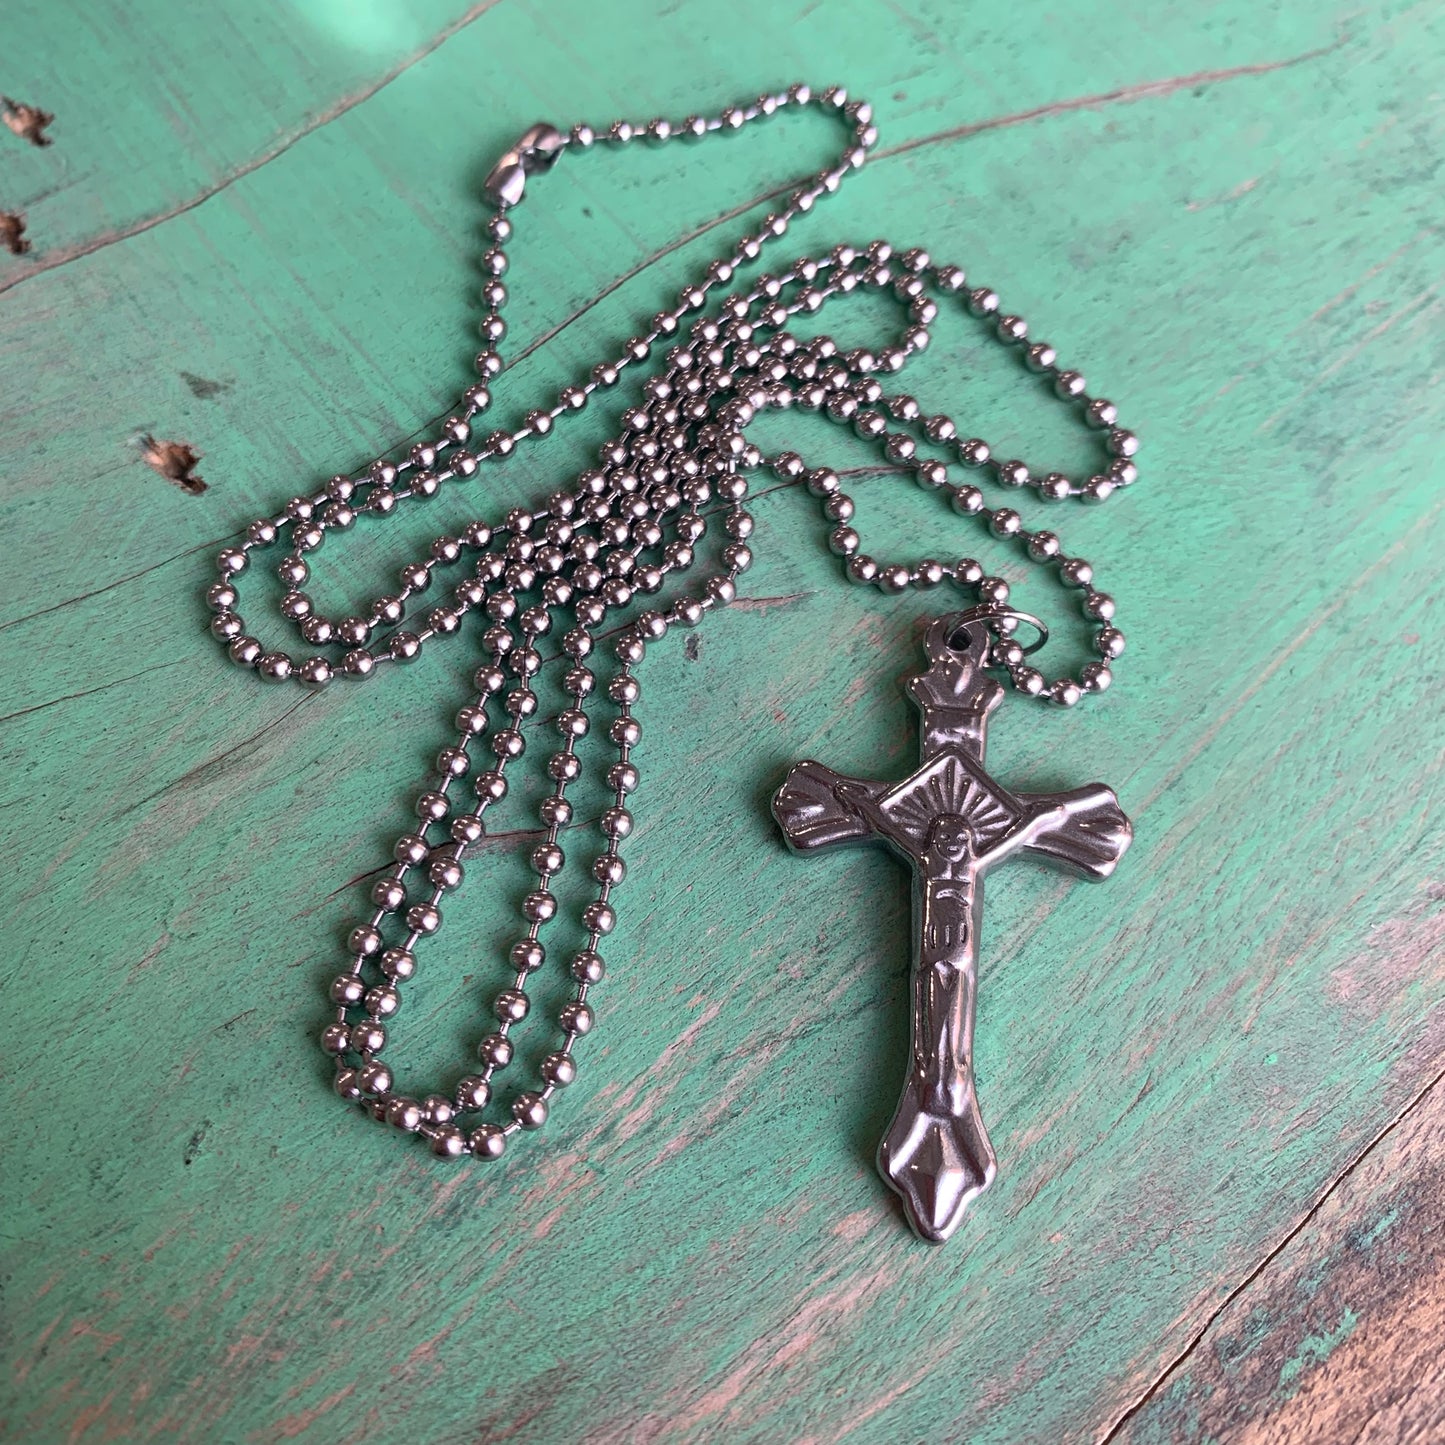 Stainless Steel Ball Chain with Crucifix